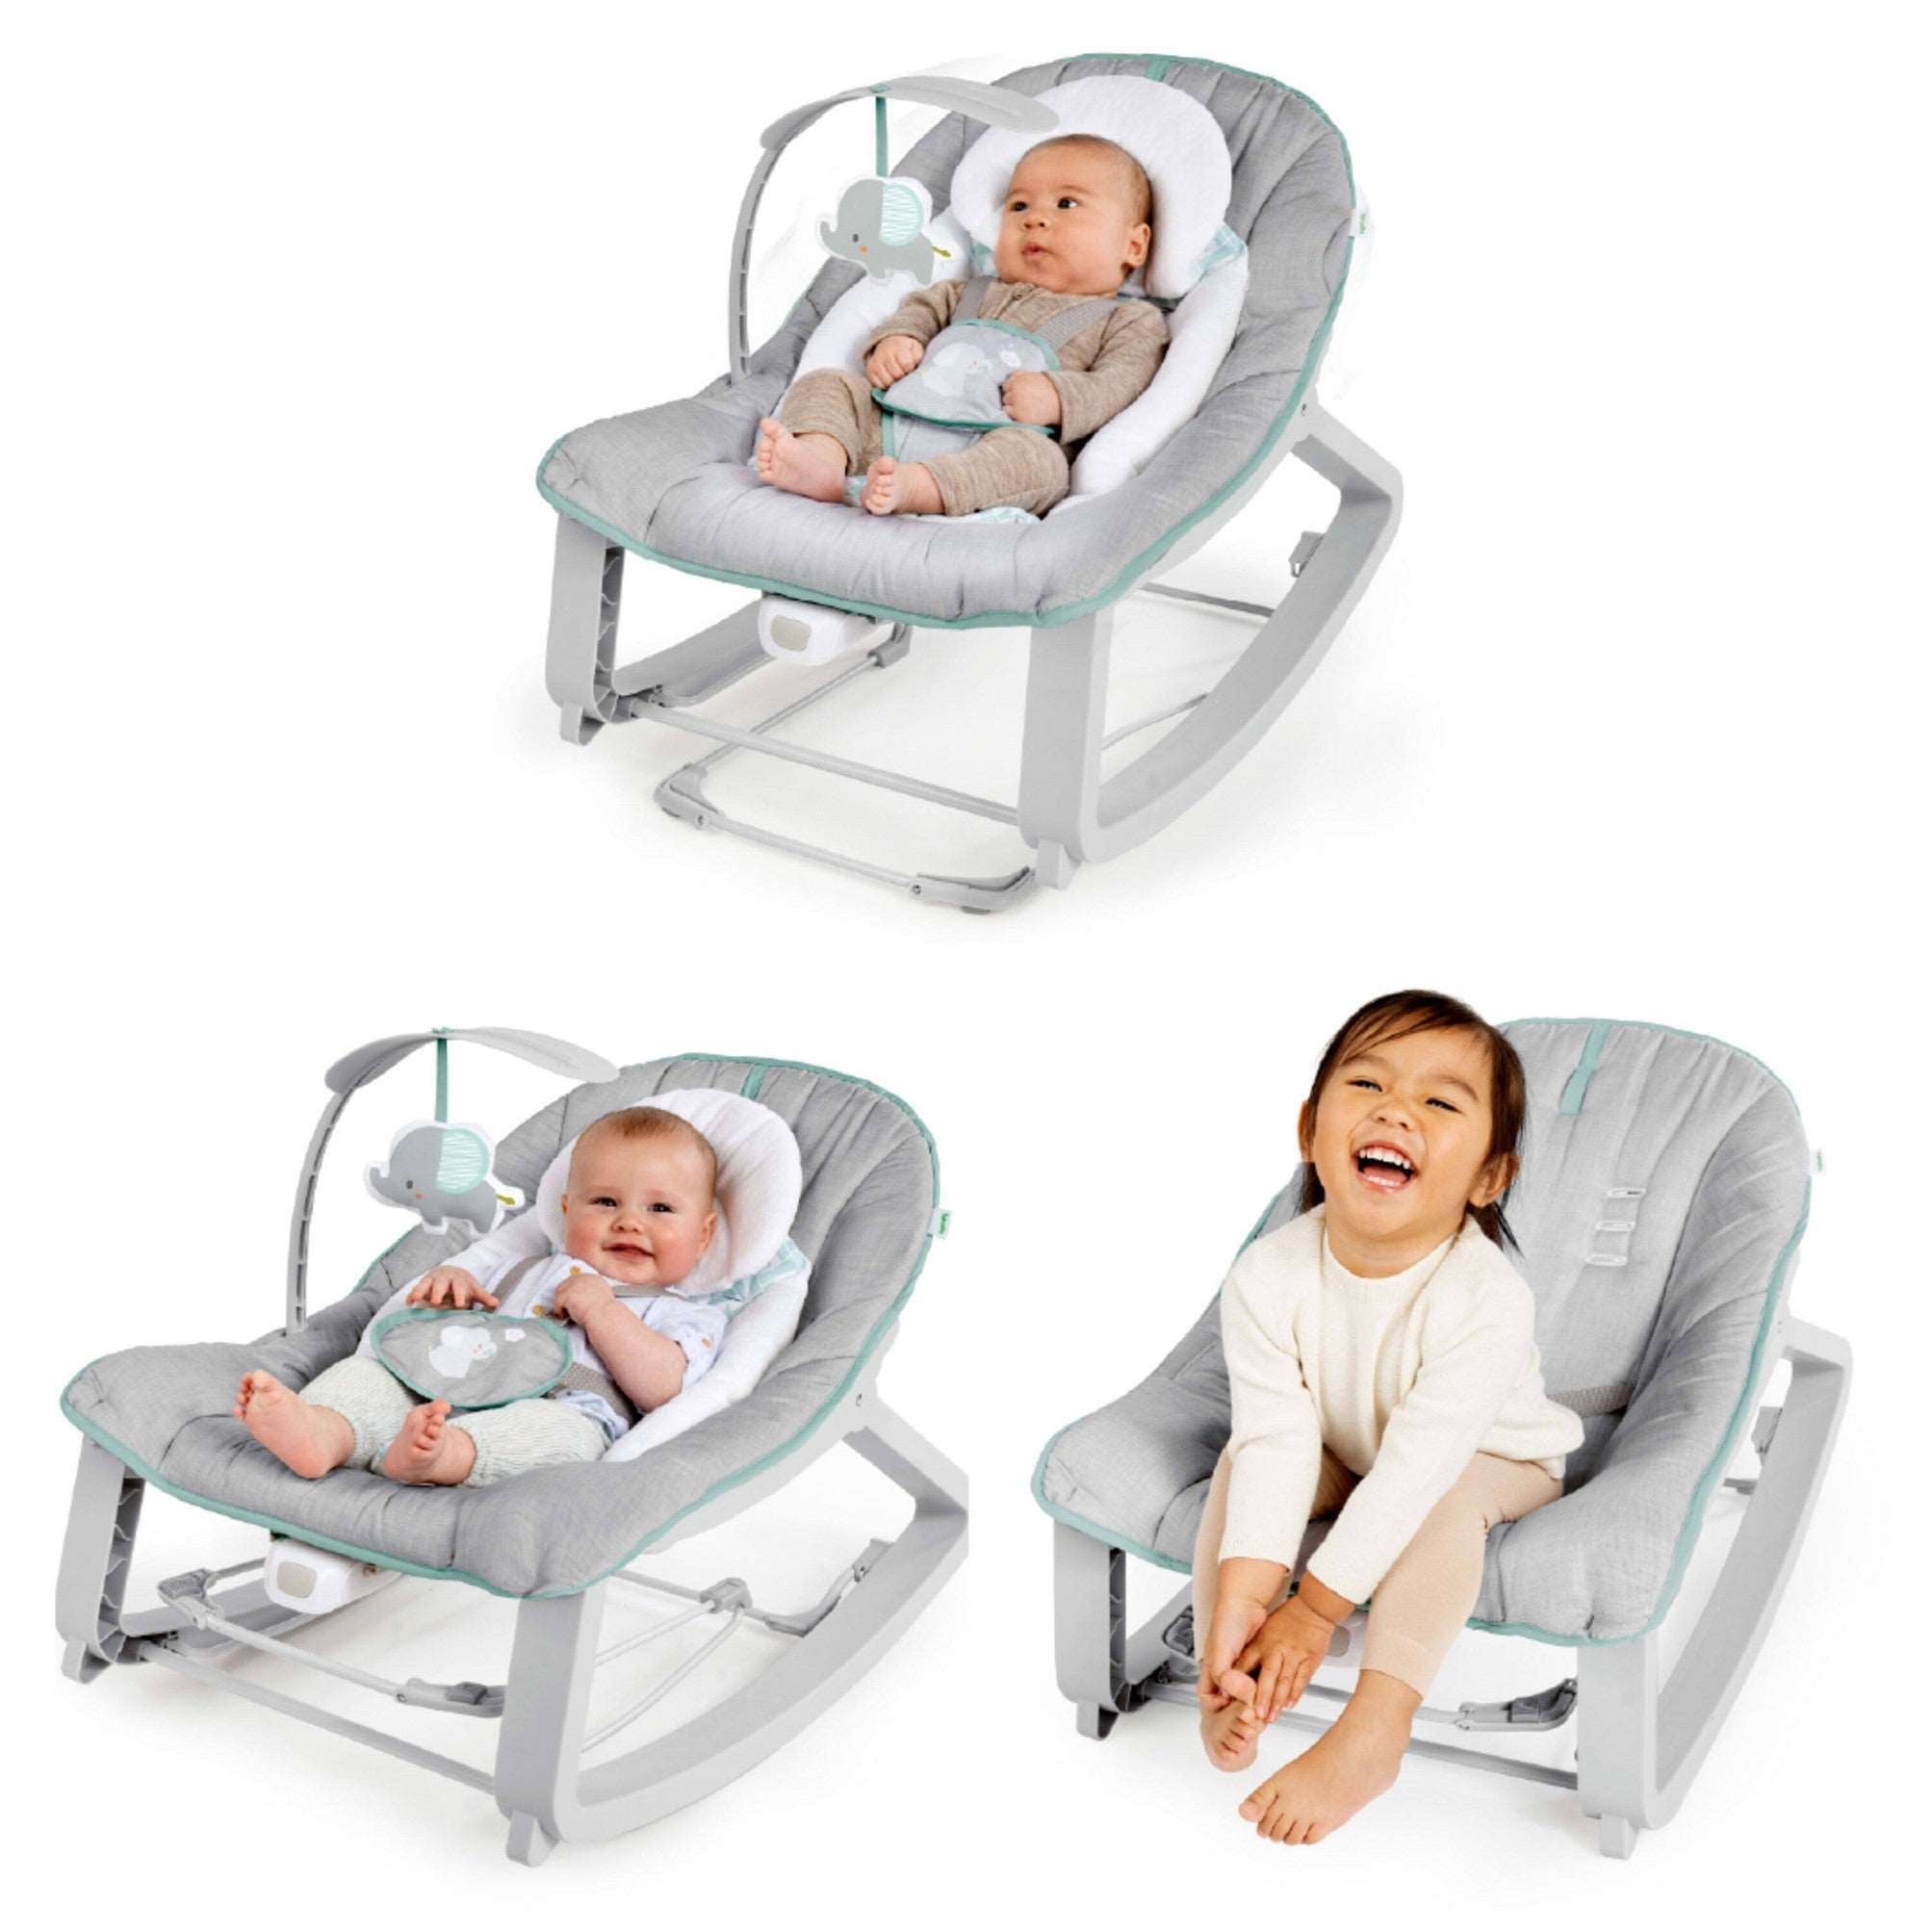 Cozy 3-in-1 Grow with Me Baby Bouncer, Rocker & Toddler Seat